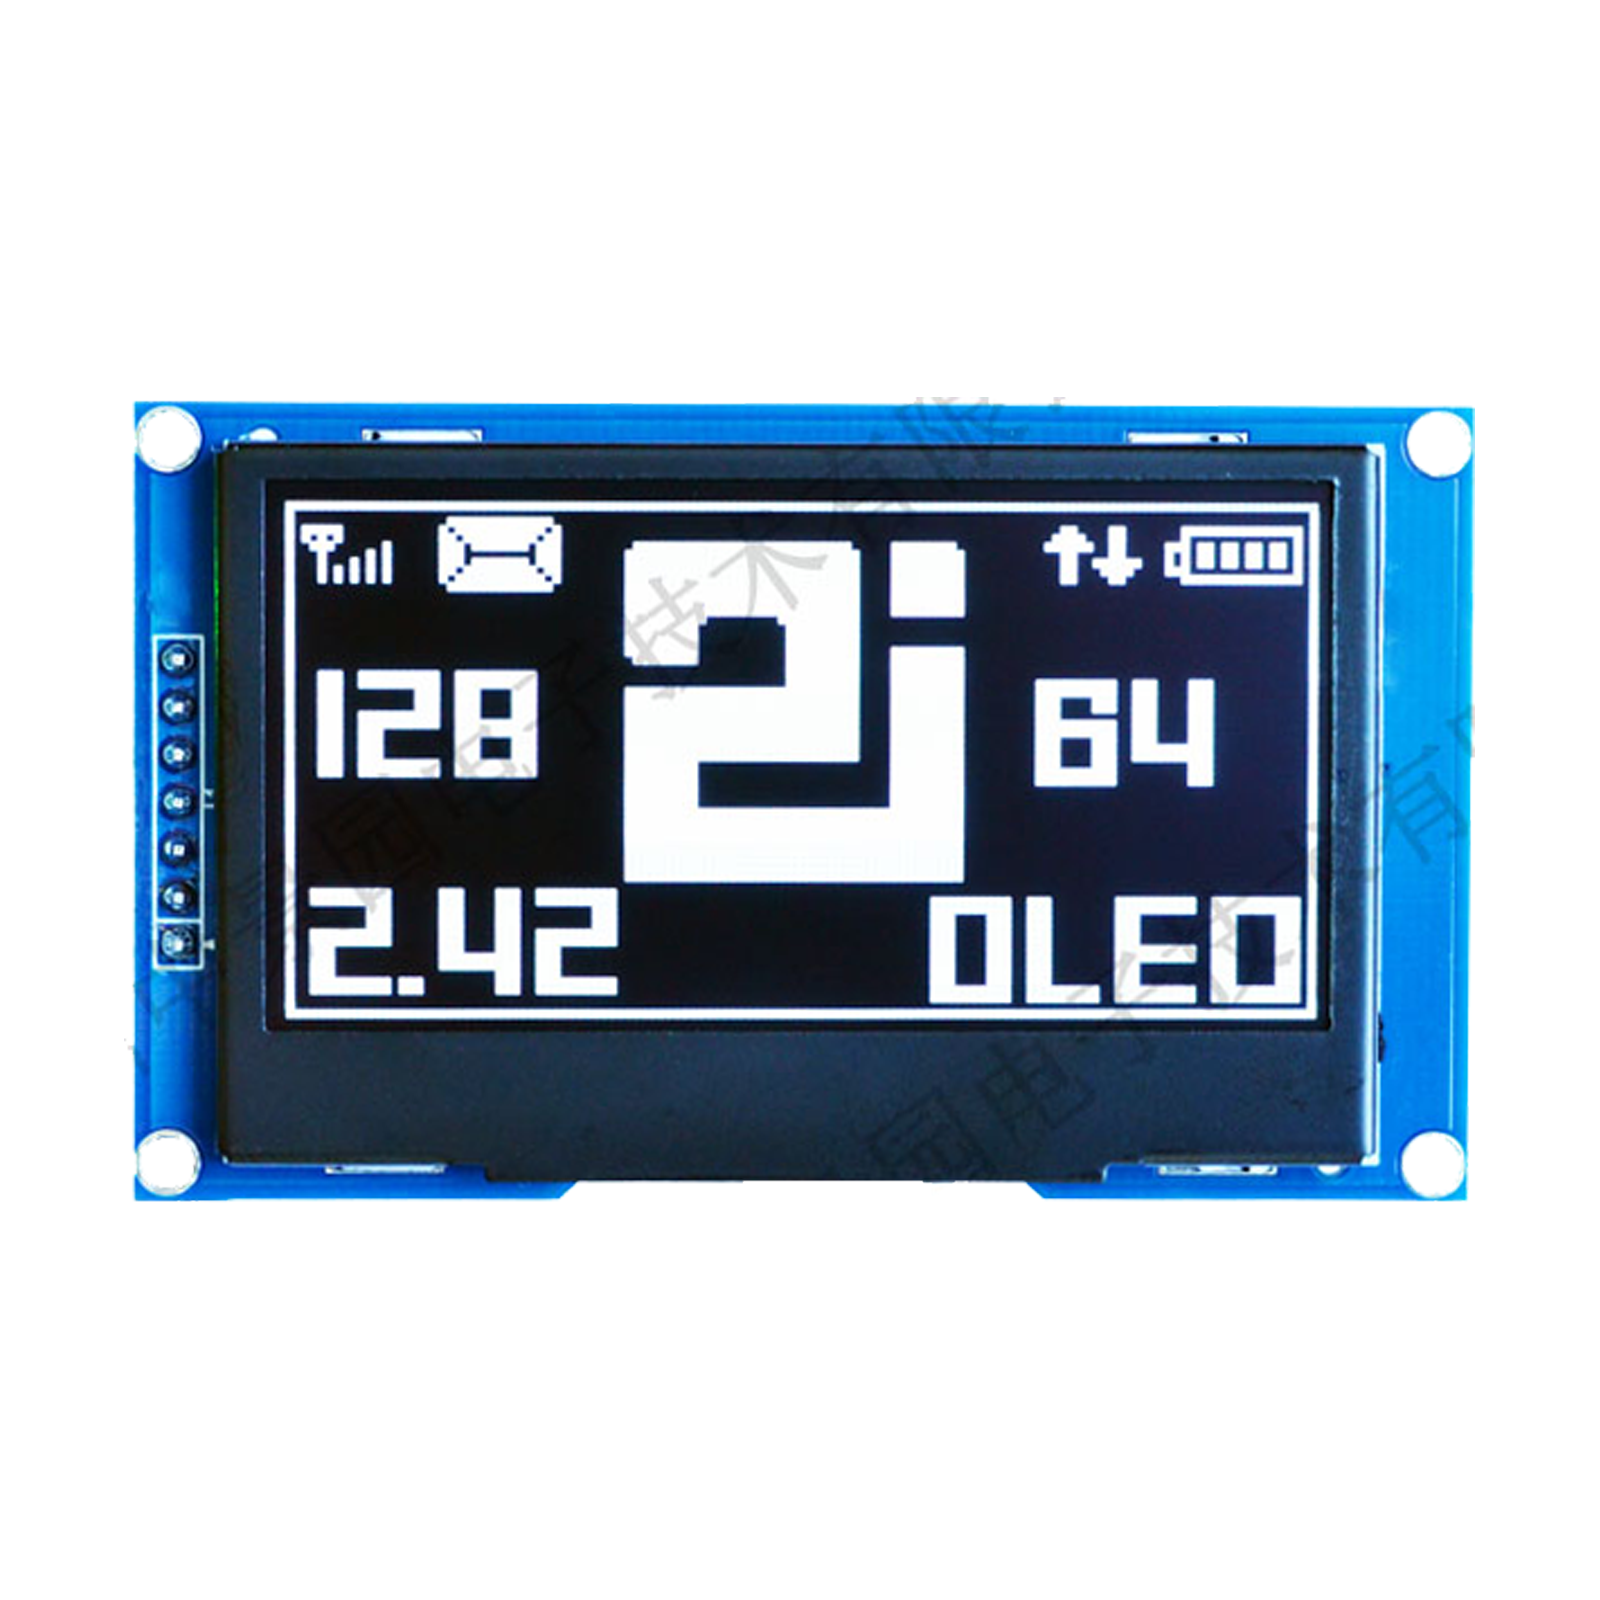 2.4-inch screen displaying some numbers